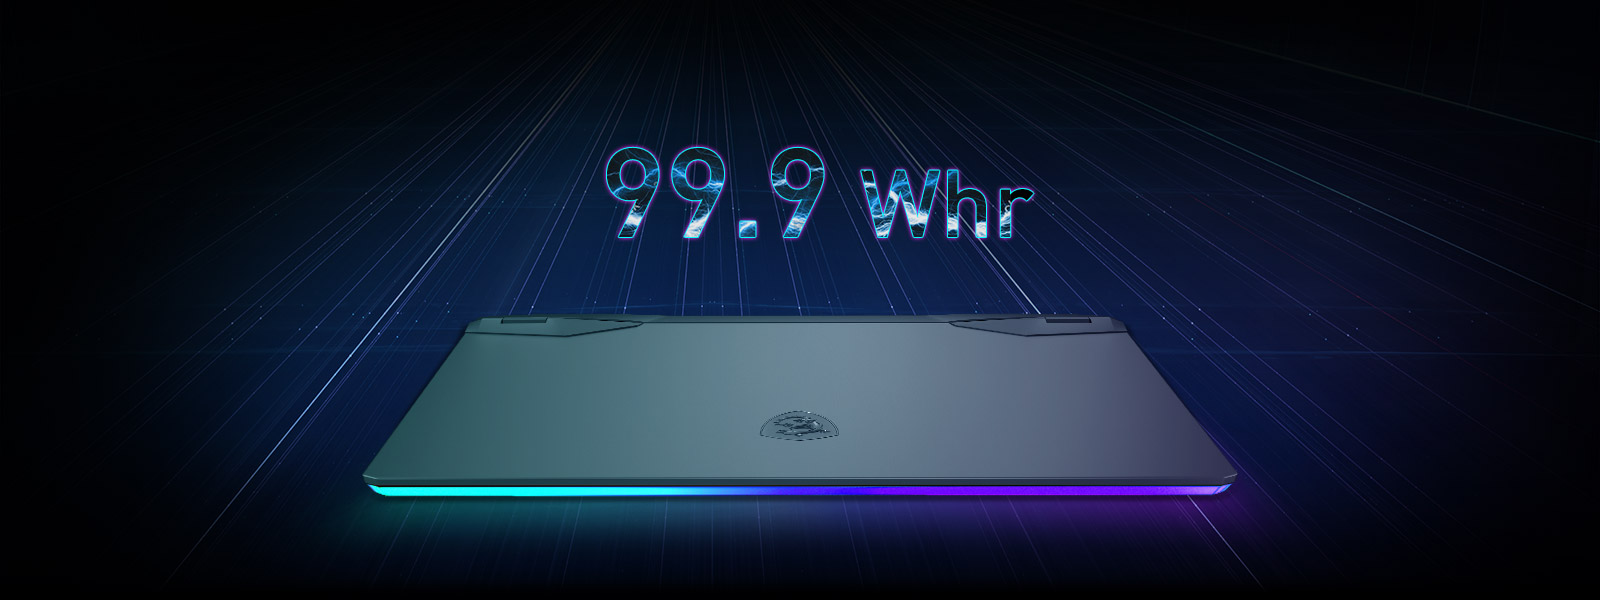 99.9 Whr Battery